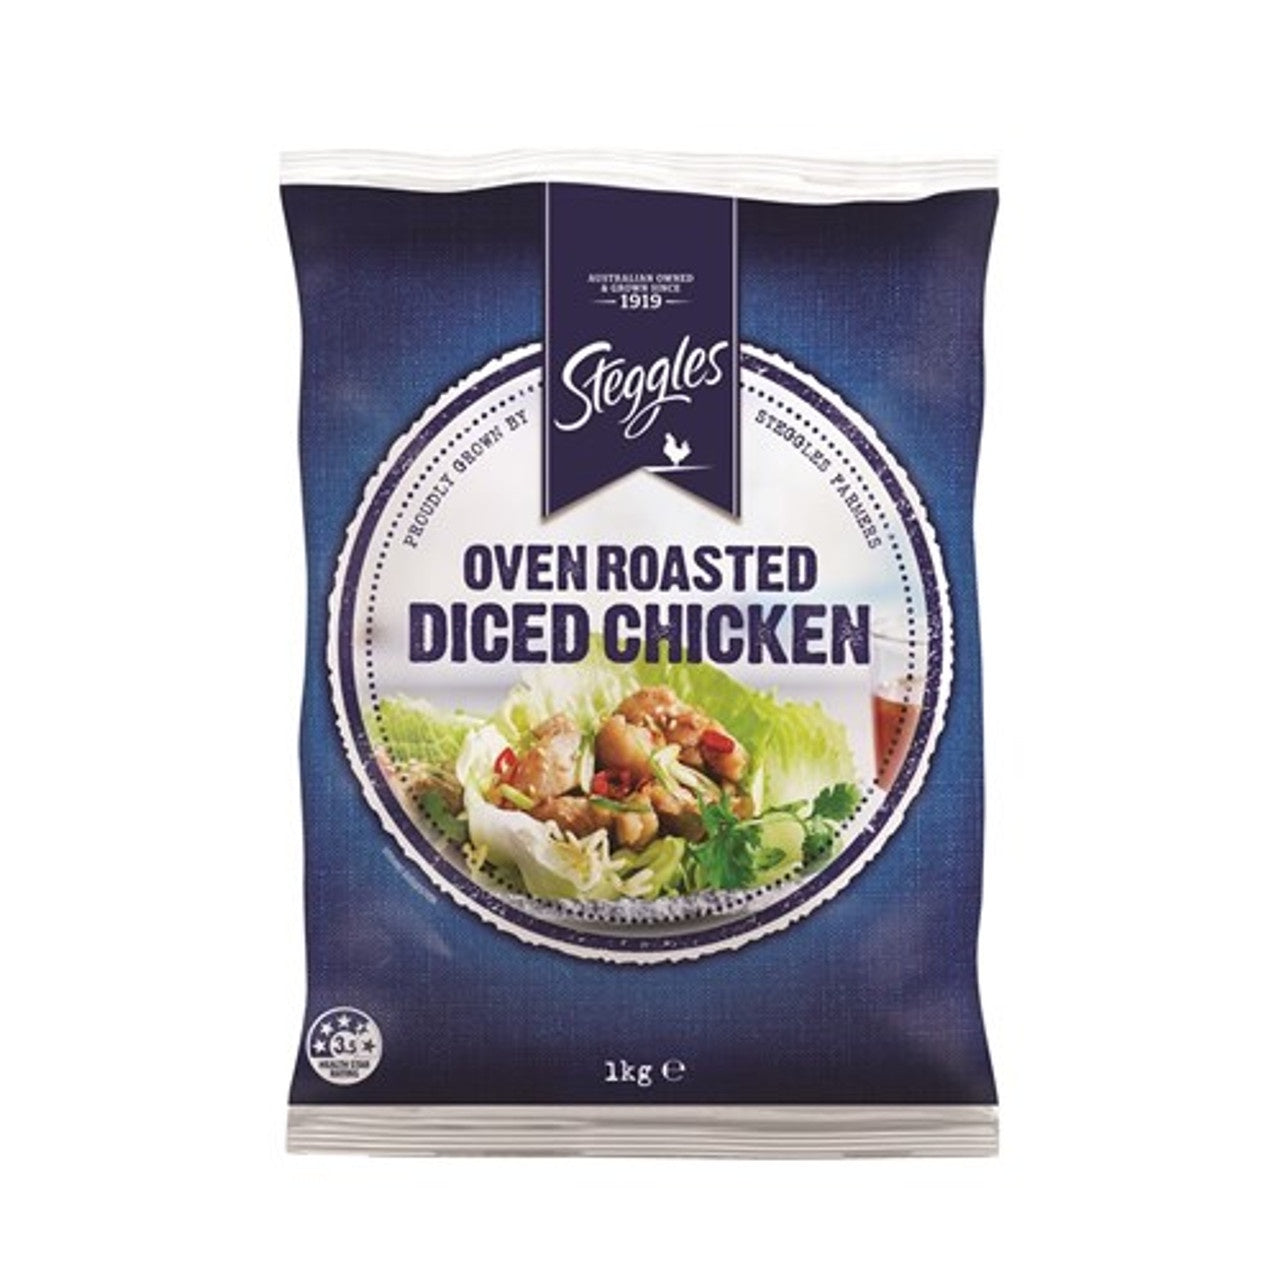 Steggles Oven Roasted Diced Chicken 1kg